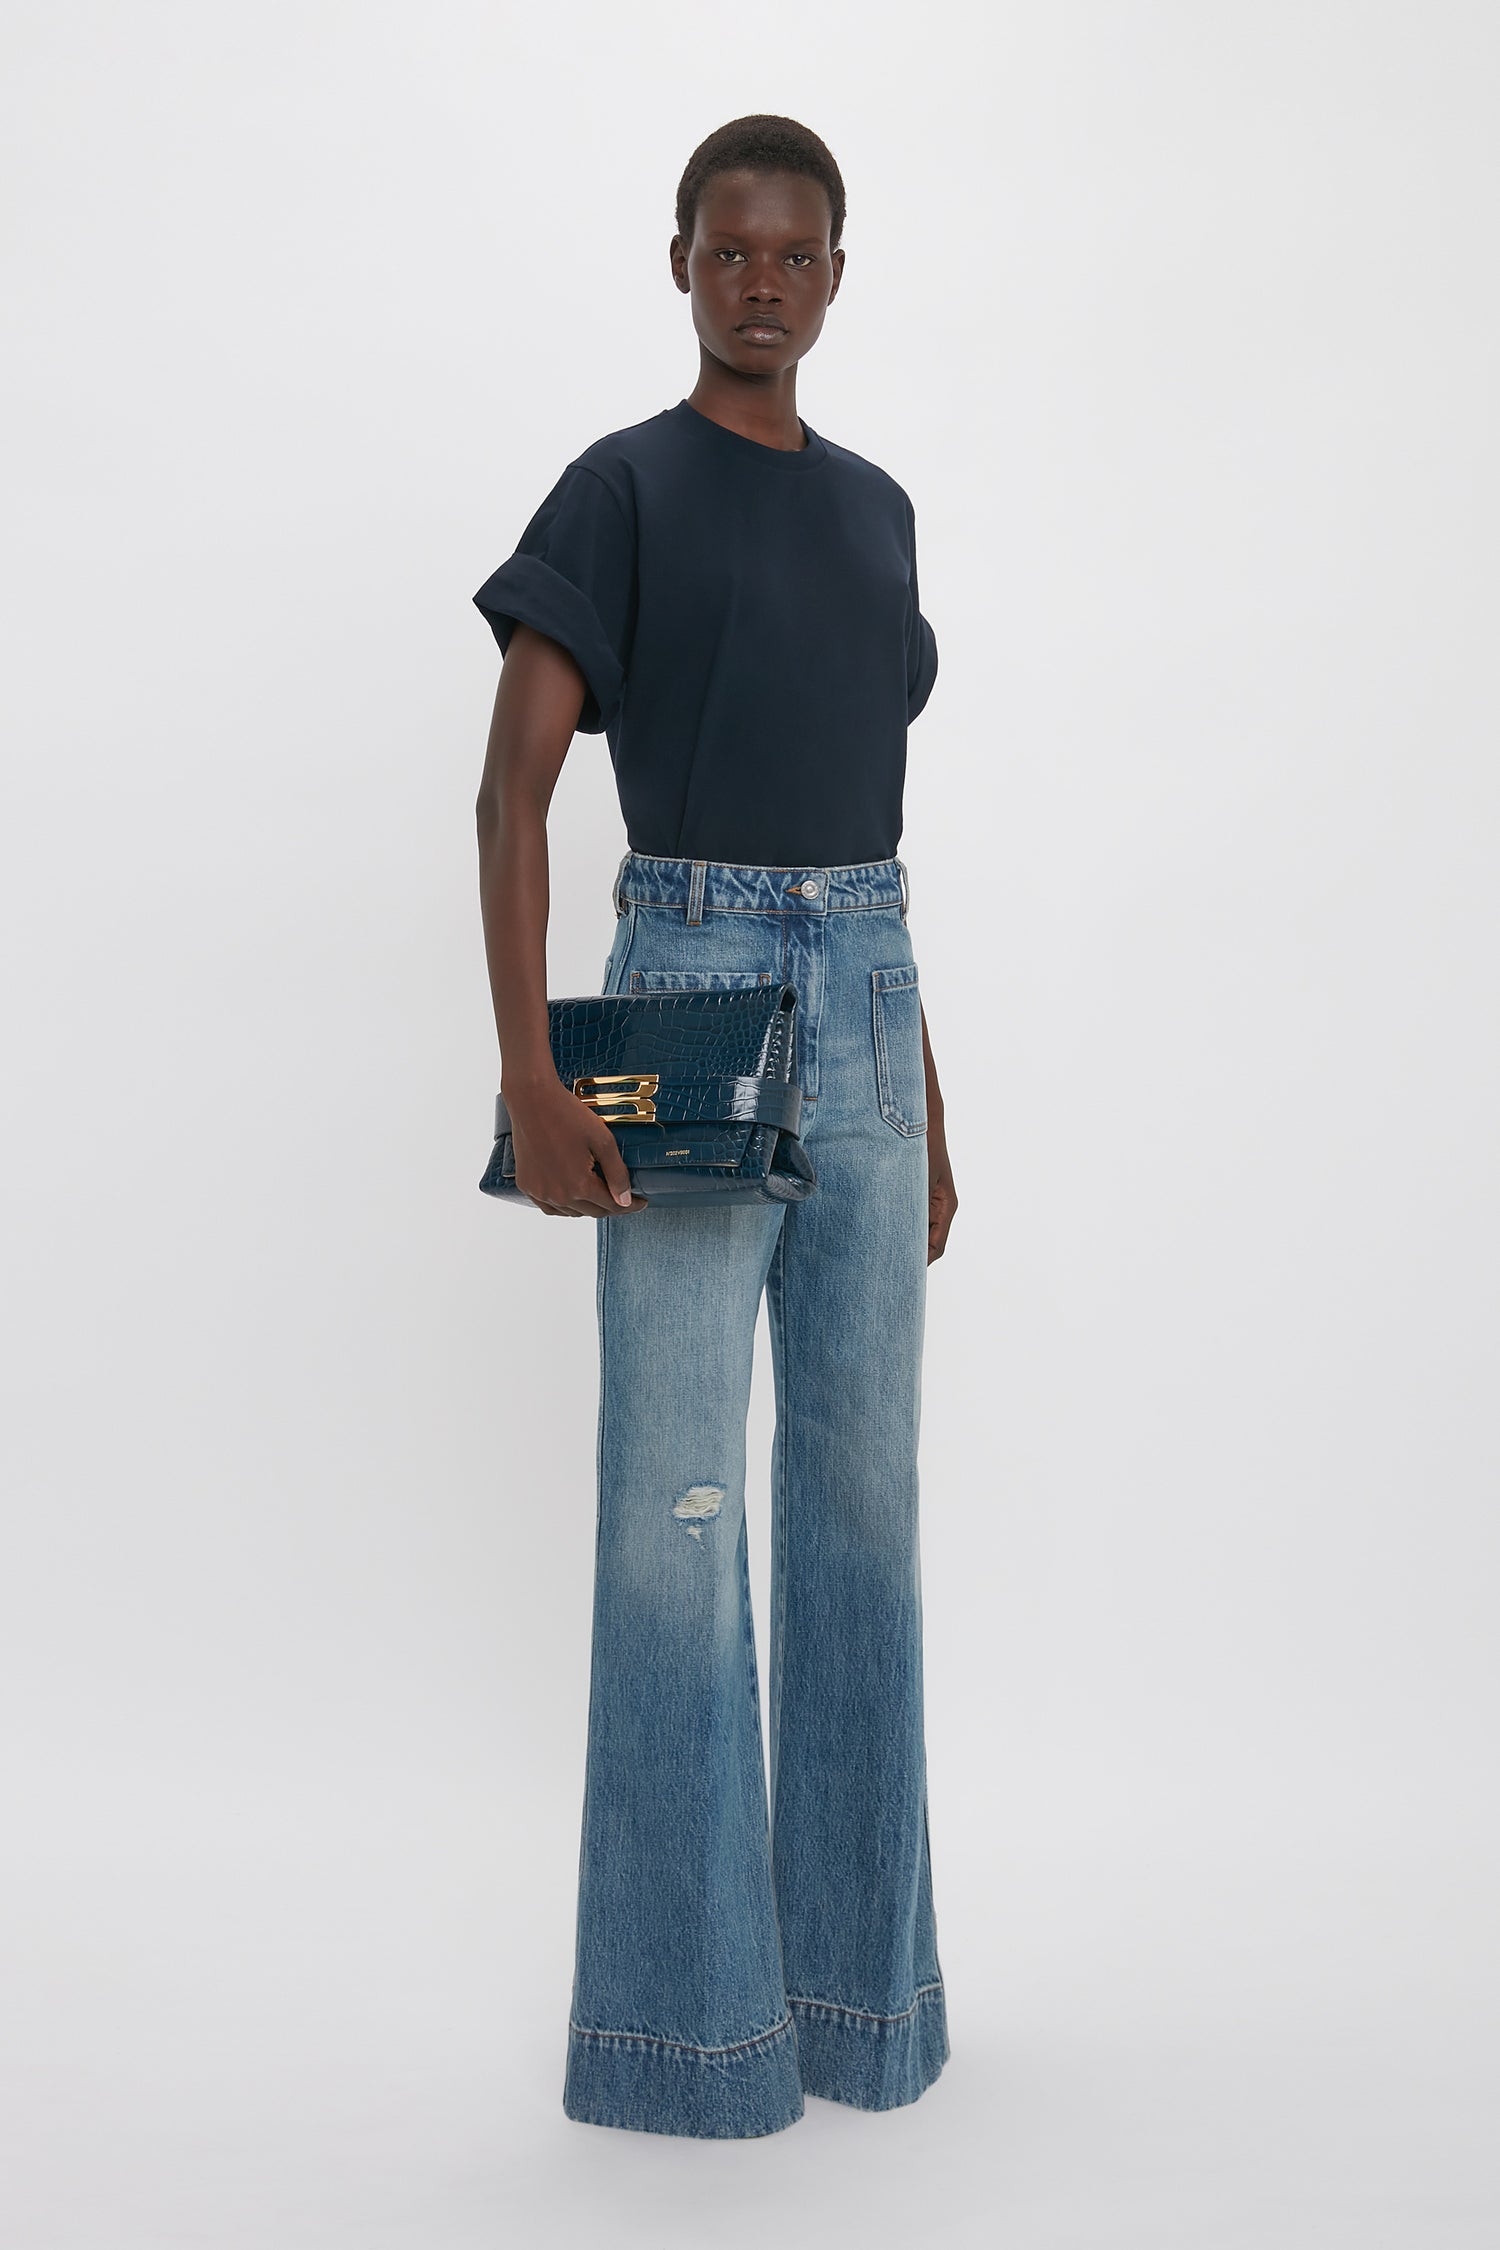 A person stands against a plain background wearing a plain navy t-shirt, high-waisted wide-leg jeans, and holding a B Pouch Bag In Croc Effect Midnight Blue Leather by Victoria Beckham.